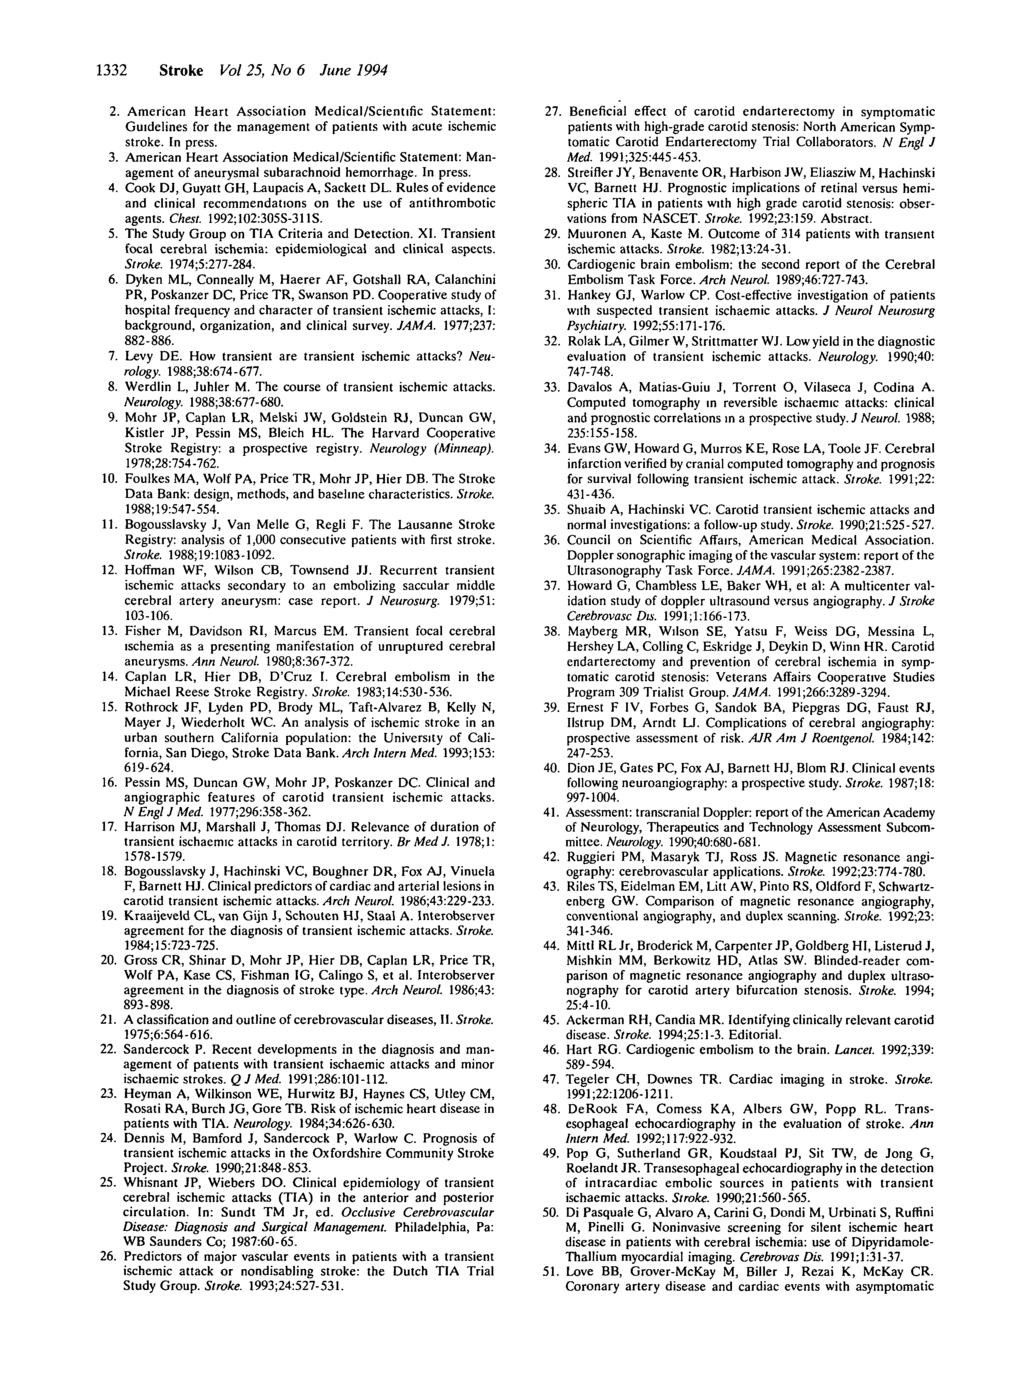 1332 Stroke Vol 25, No 6 June 1994 2. American Heart Association Medical/Scientific Statement: Guidelines for the management of patients with acute ischemic stroke. In press. 3.